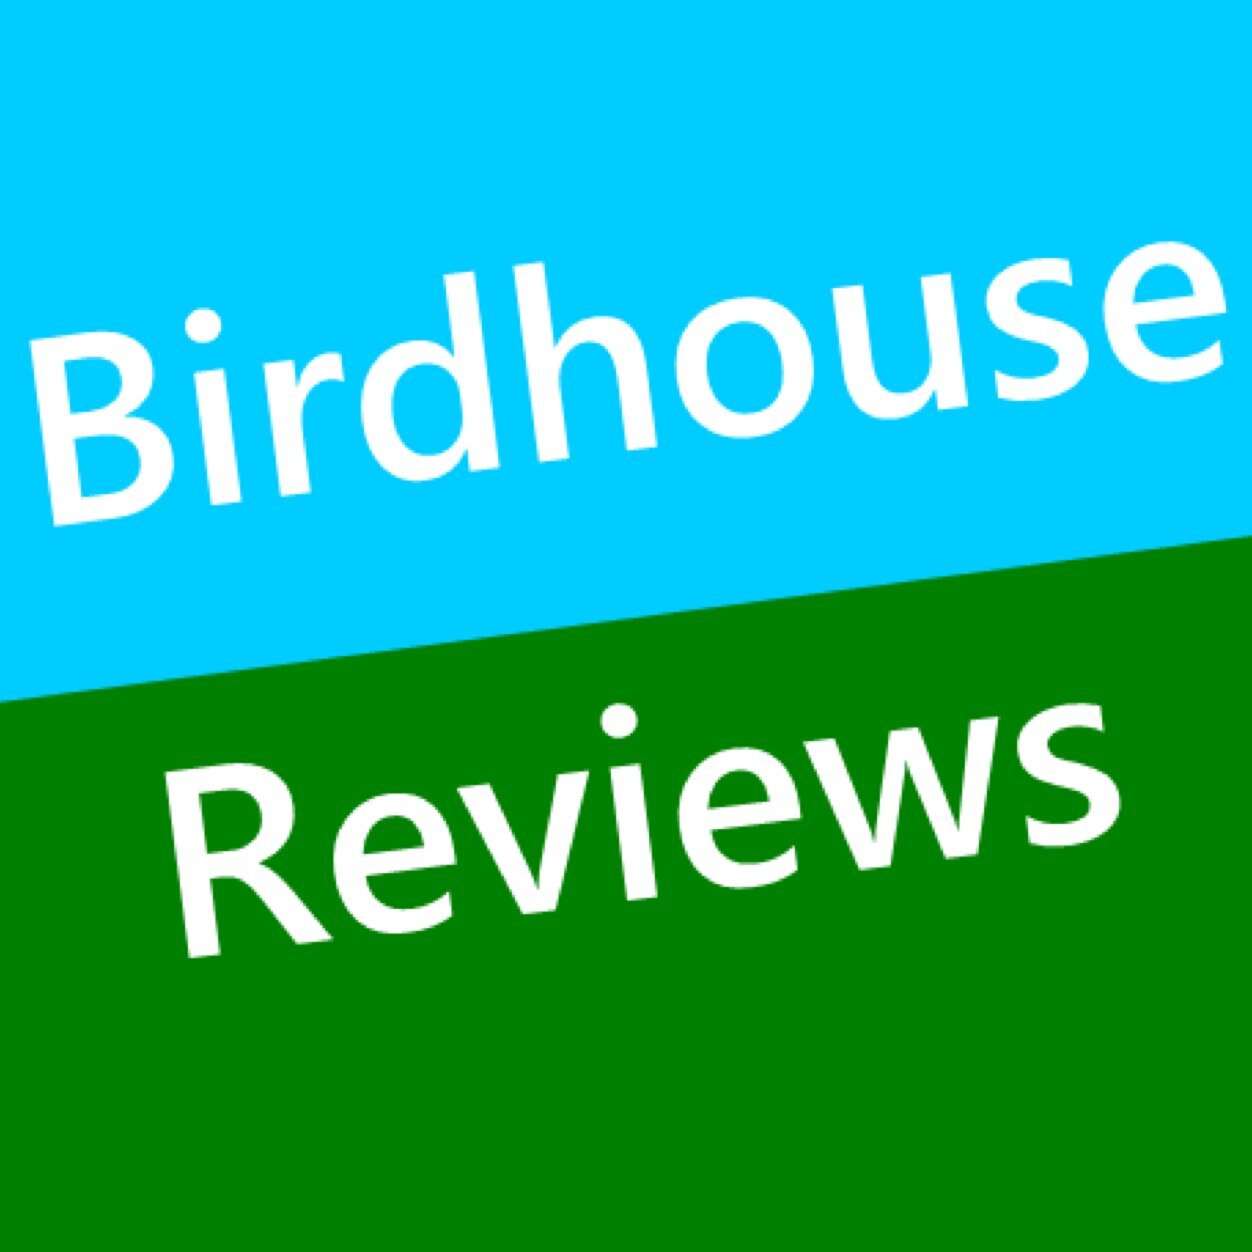 At Birdhouse Reviews we provide all the information you need to create a bird friendly garden! Follow if you love birds